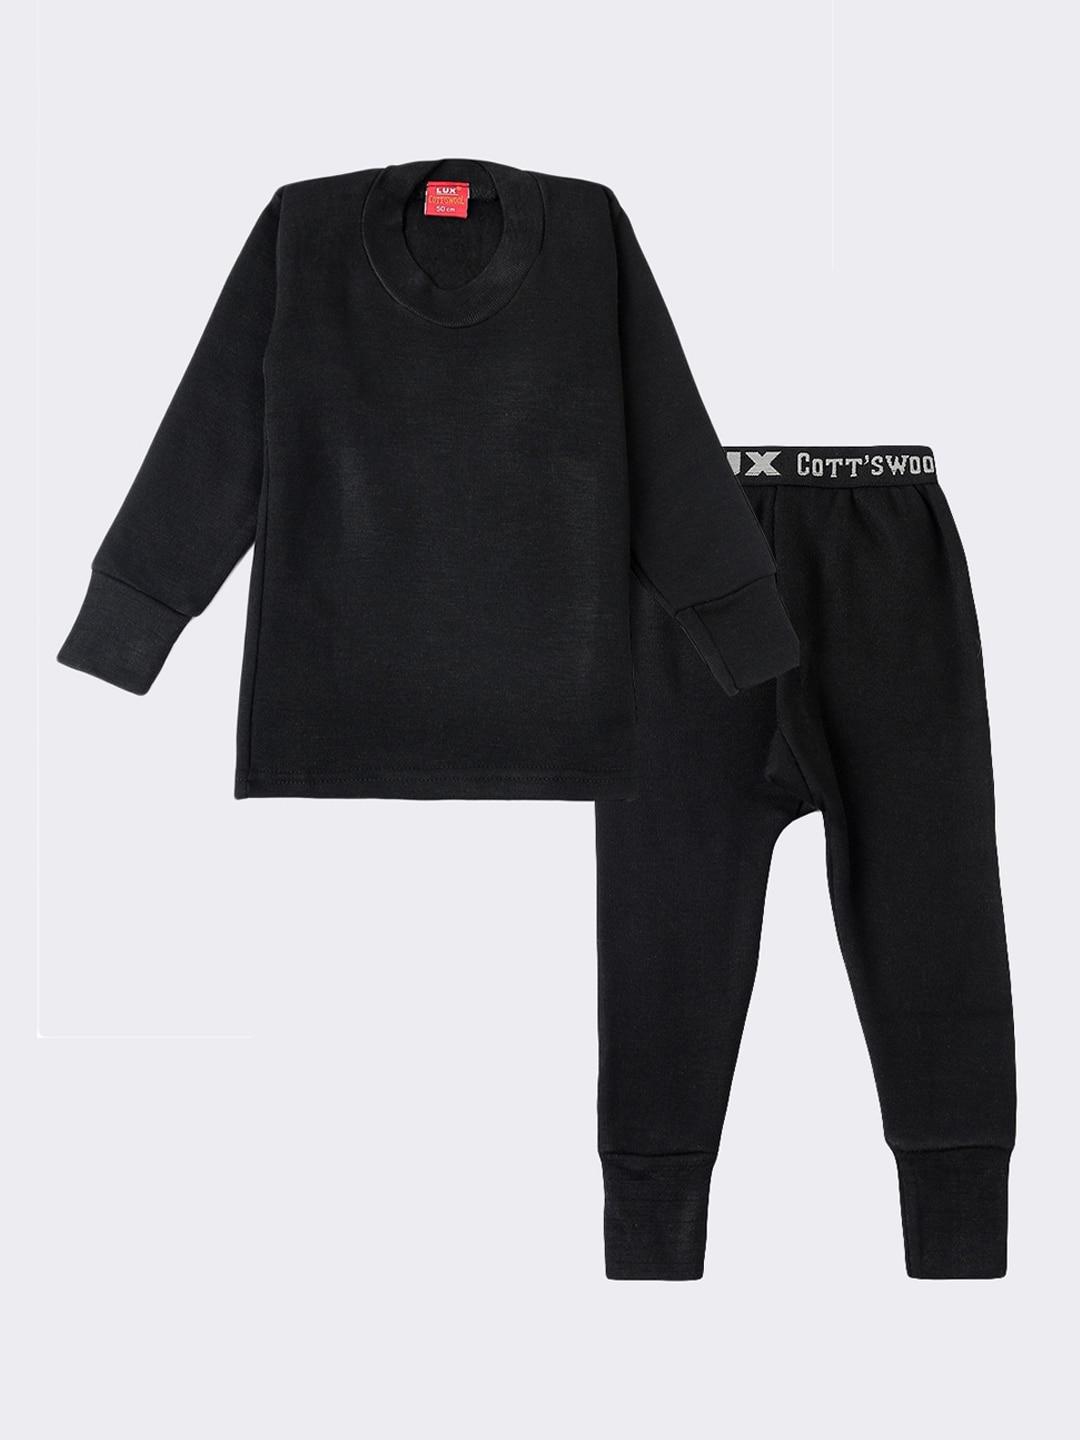 Lux Cottswool Boys Black Solid Cotton Thermal Sets